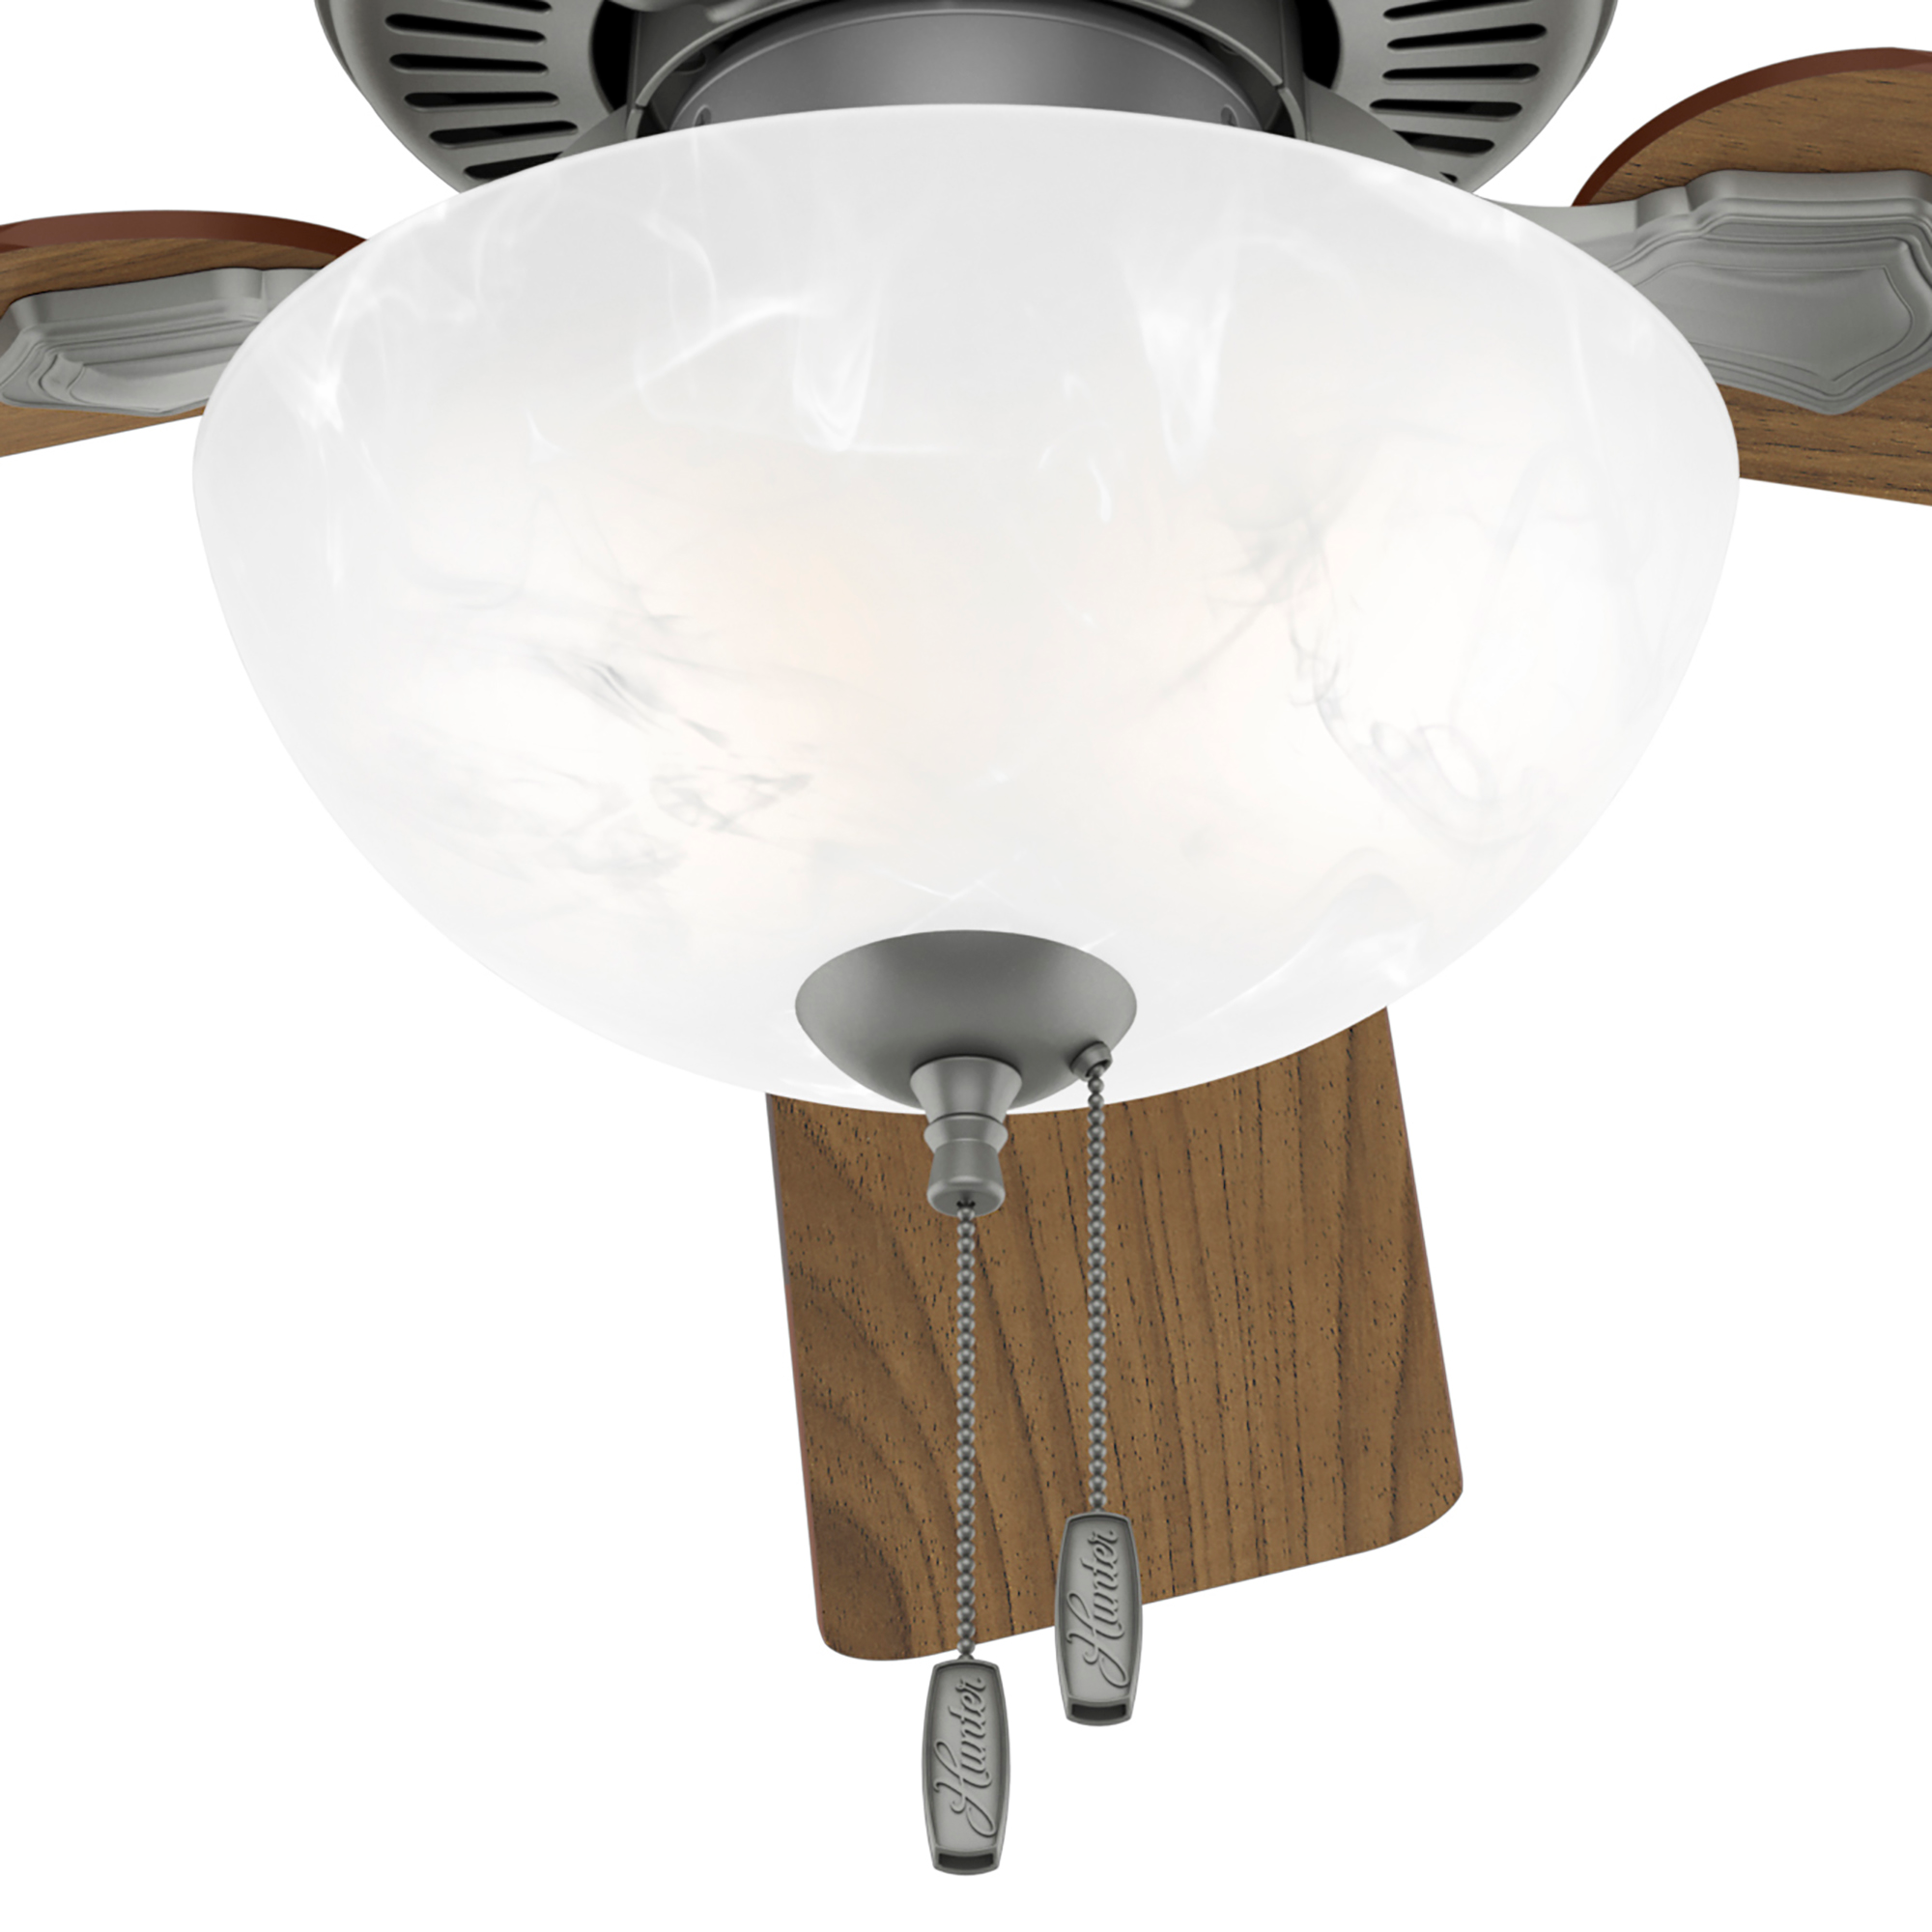 Hunter 52 inch Swanson Ceiling Fan with LED Light Kit and Pull Chain